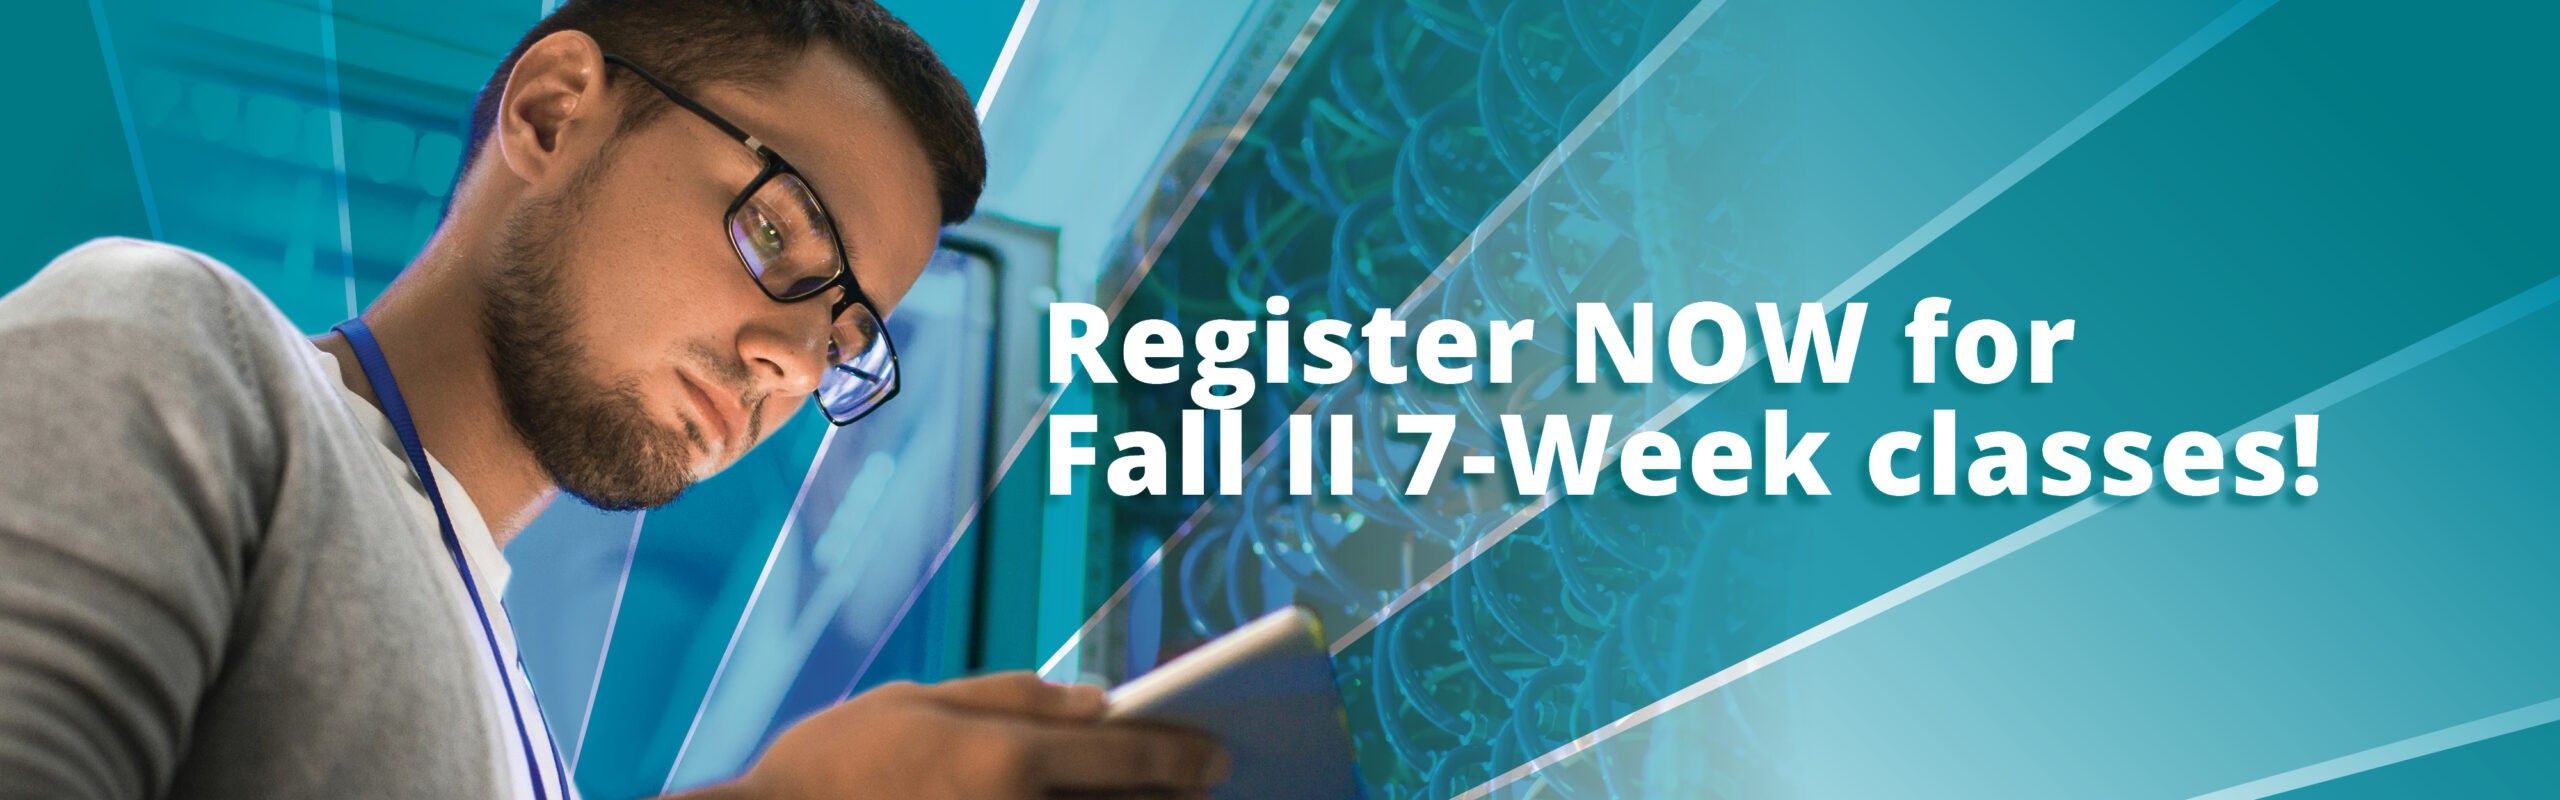 Register now for Fall II classes